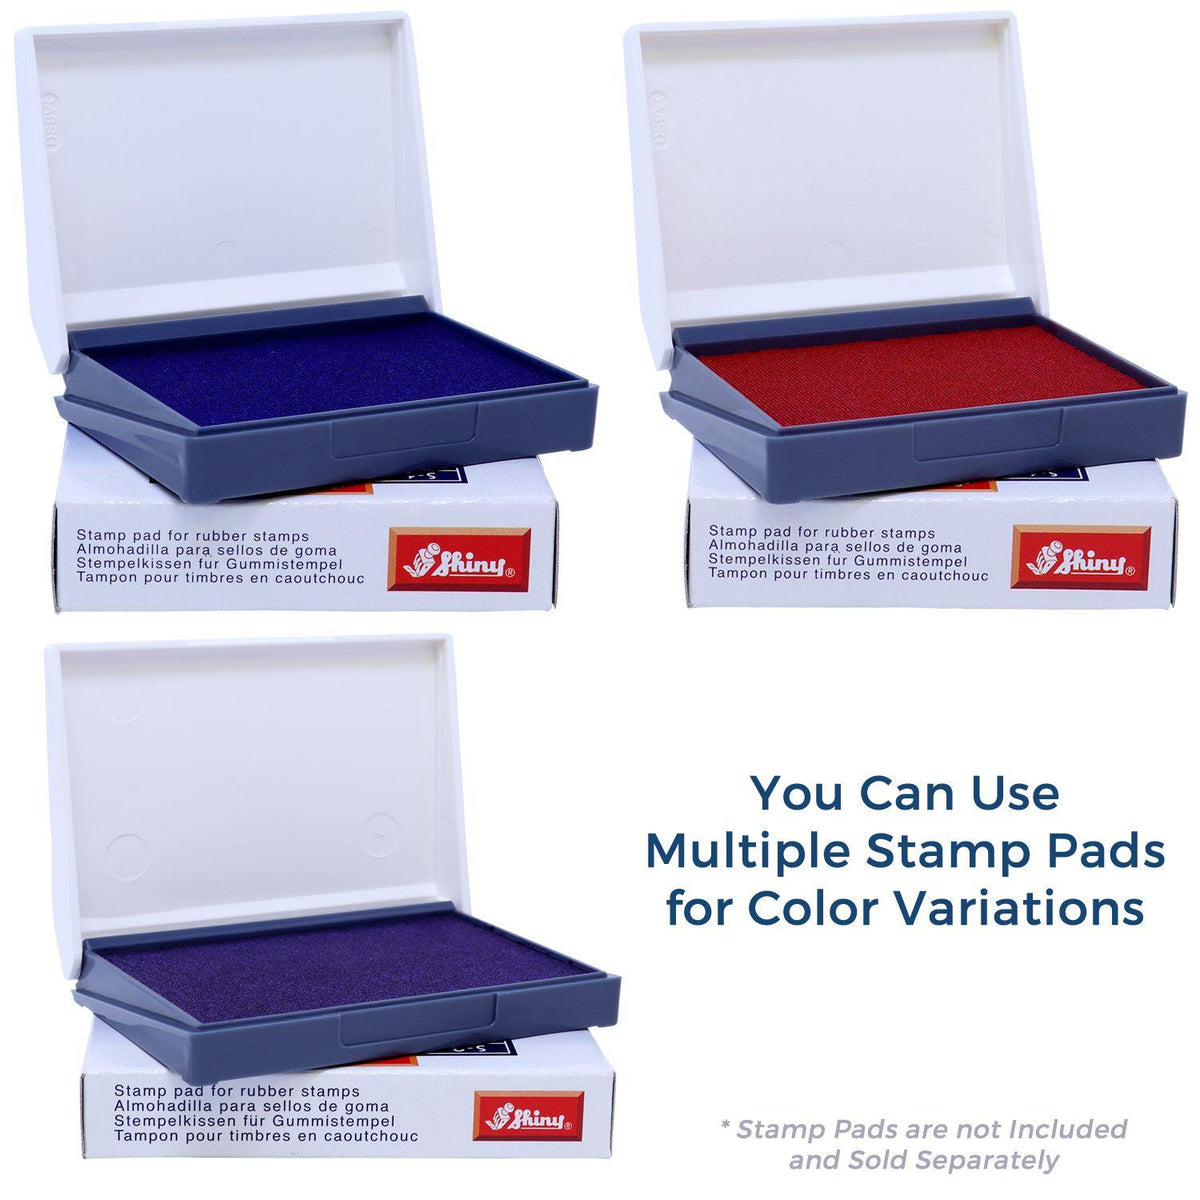 Stamp Pads for Large Revisado Rubber Stamp Available